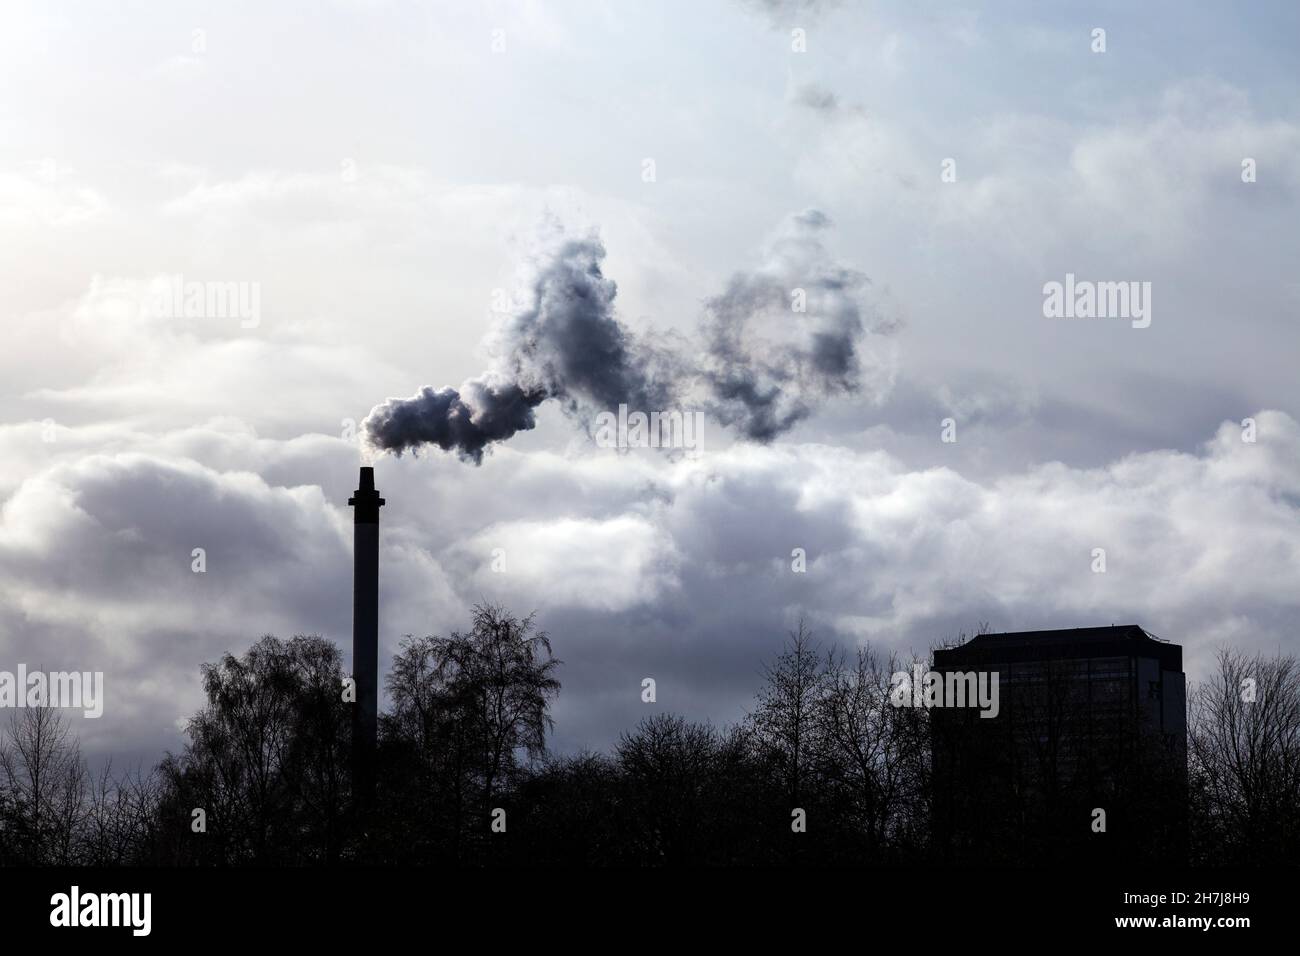 Thick smoke coming from an industrial chimney Stock Photo